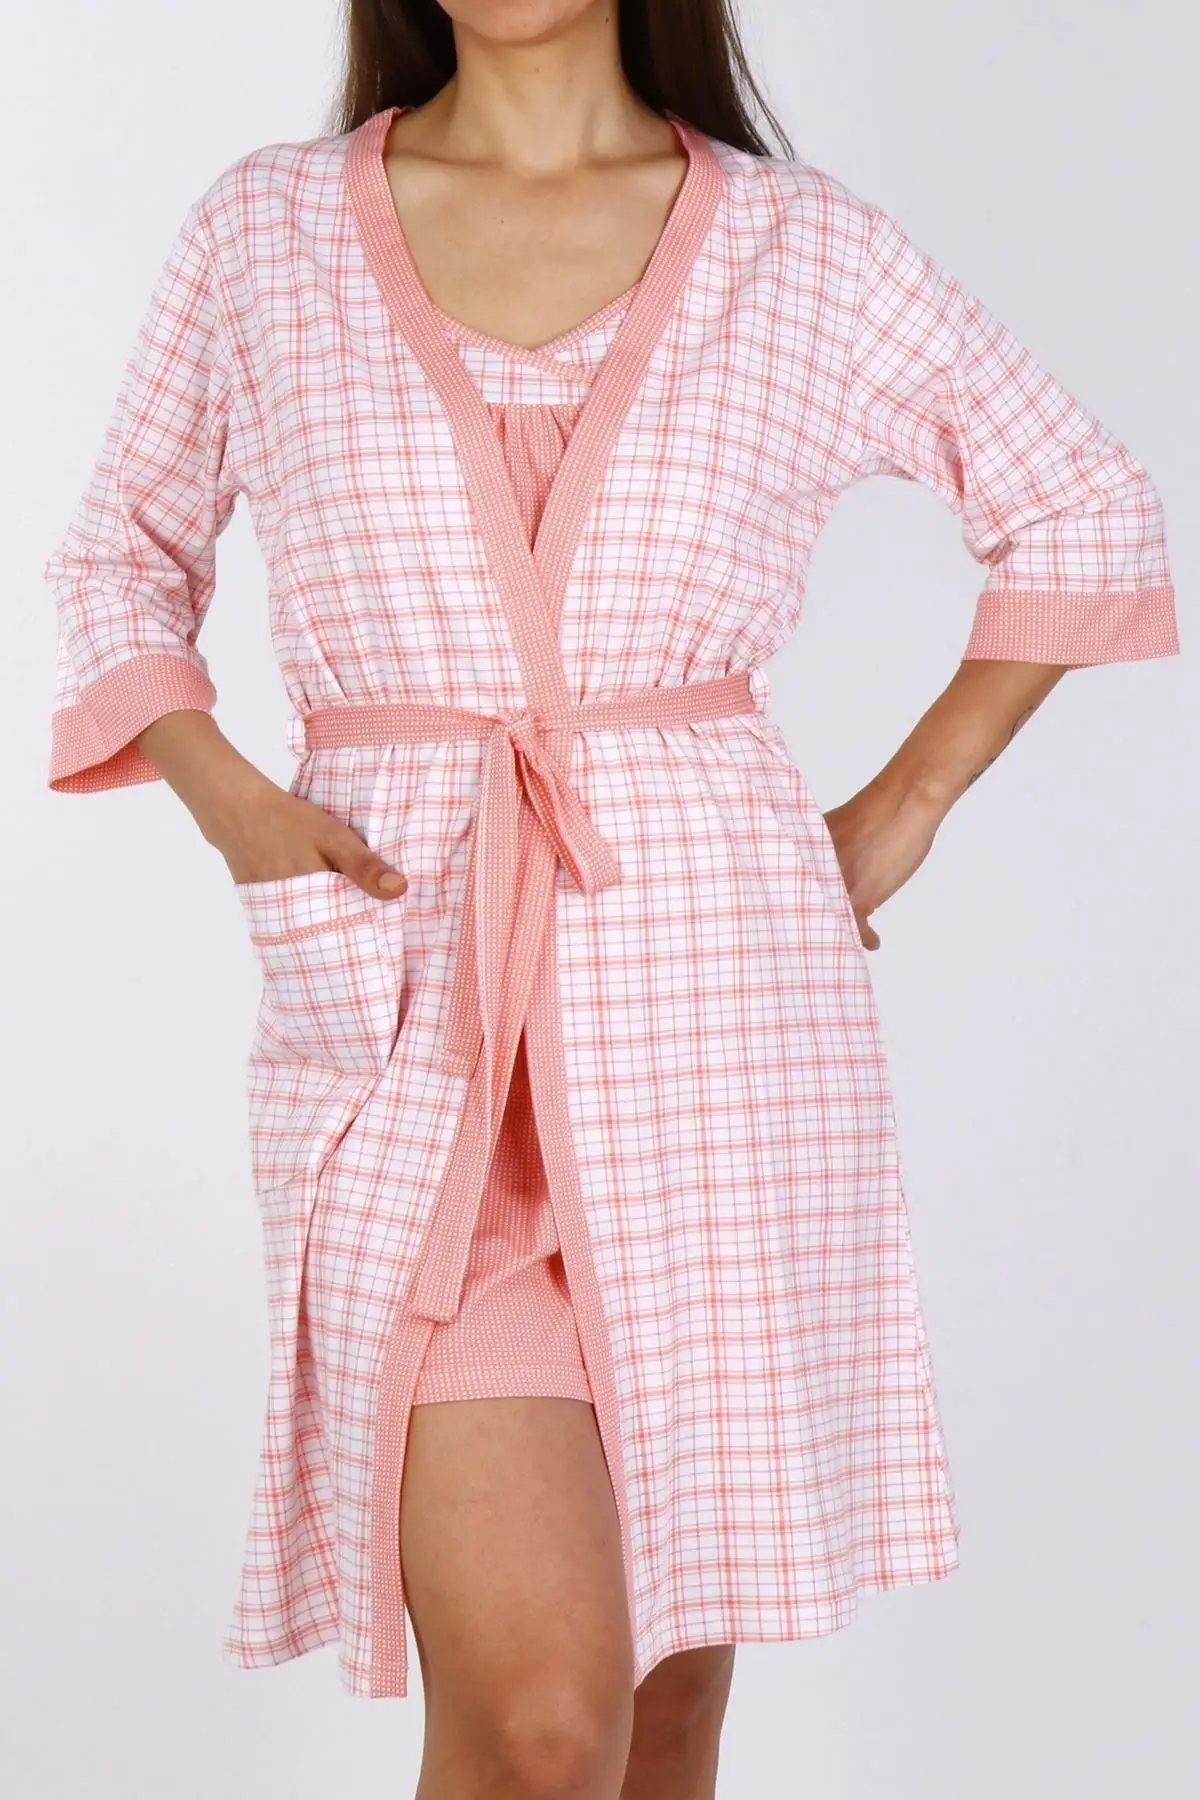 

Dressing Gown Salmon Tunic Nightgown Rope Hanging Double Suit Pocket Cotton Bathrobe Nightgown Gown